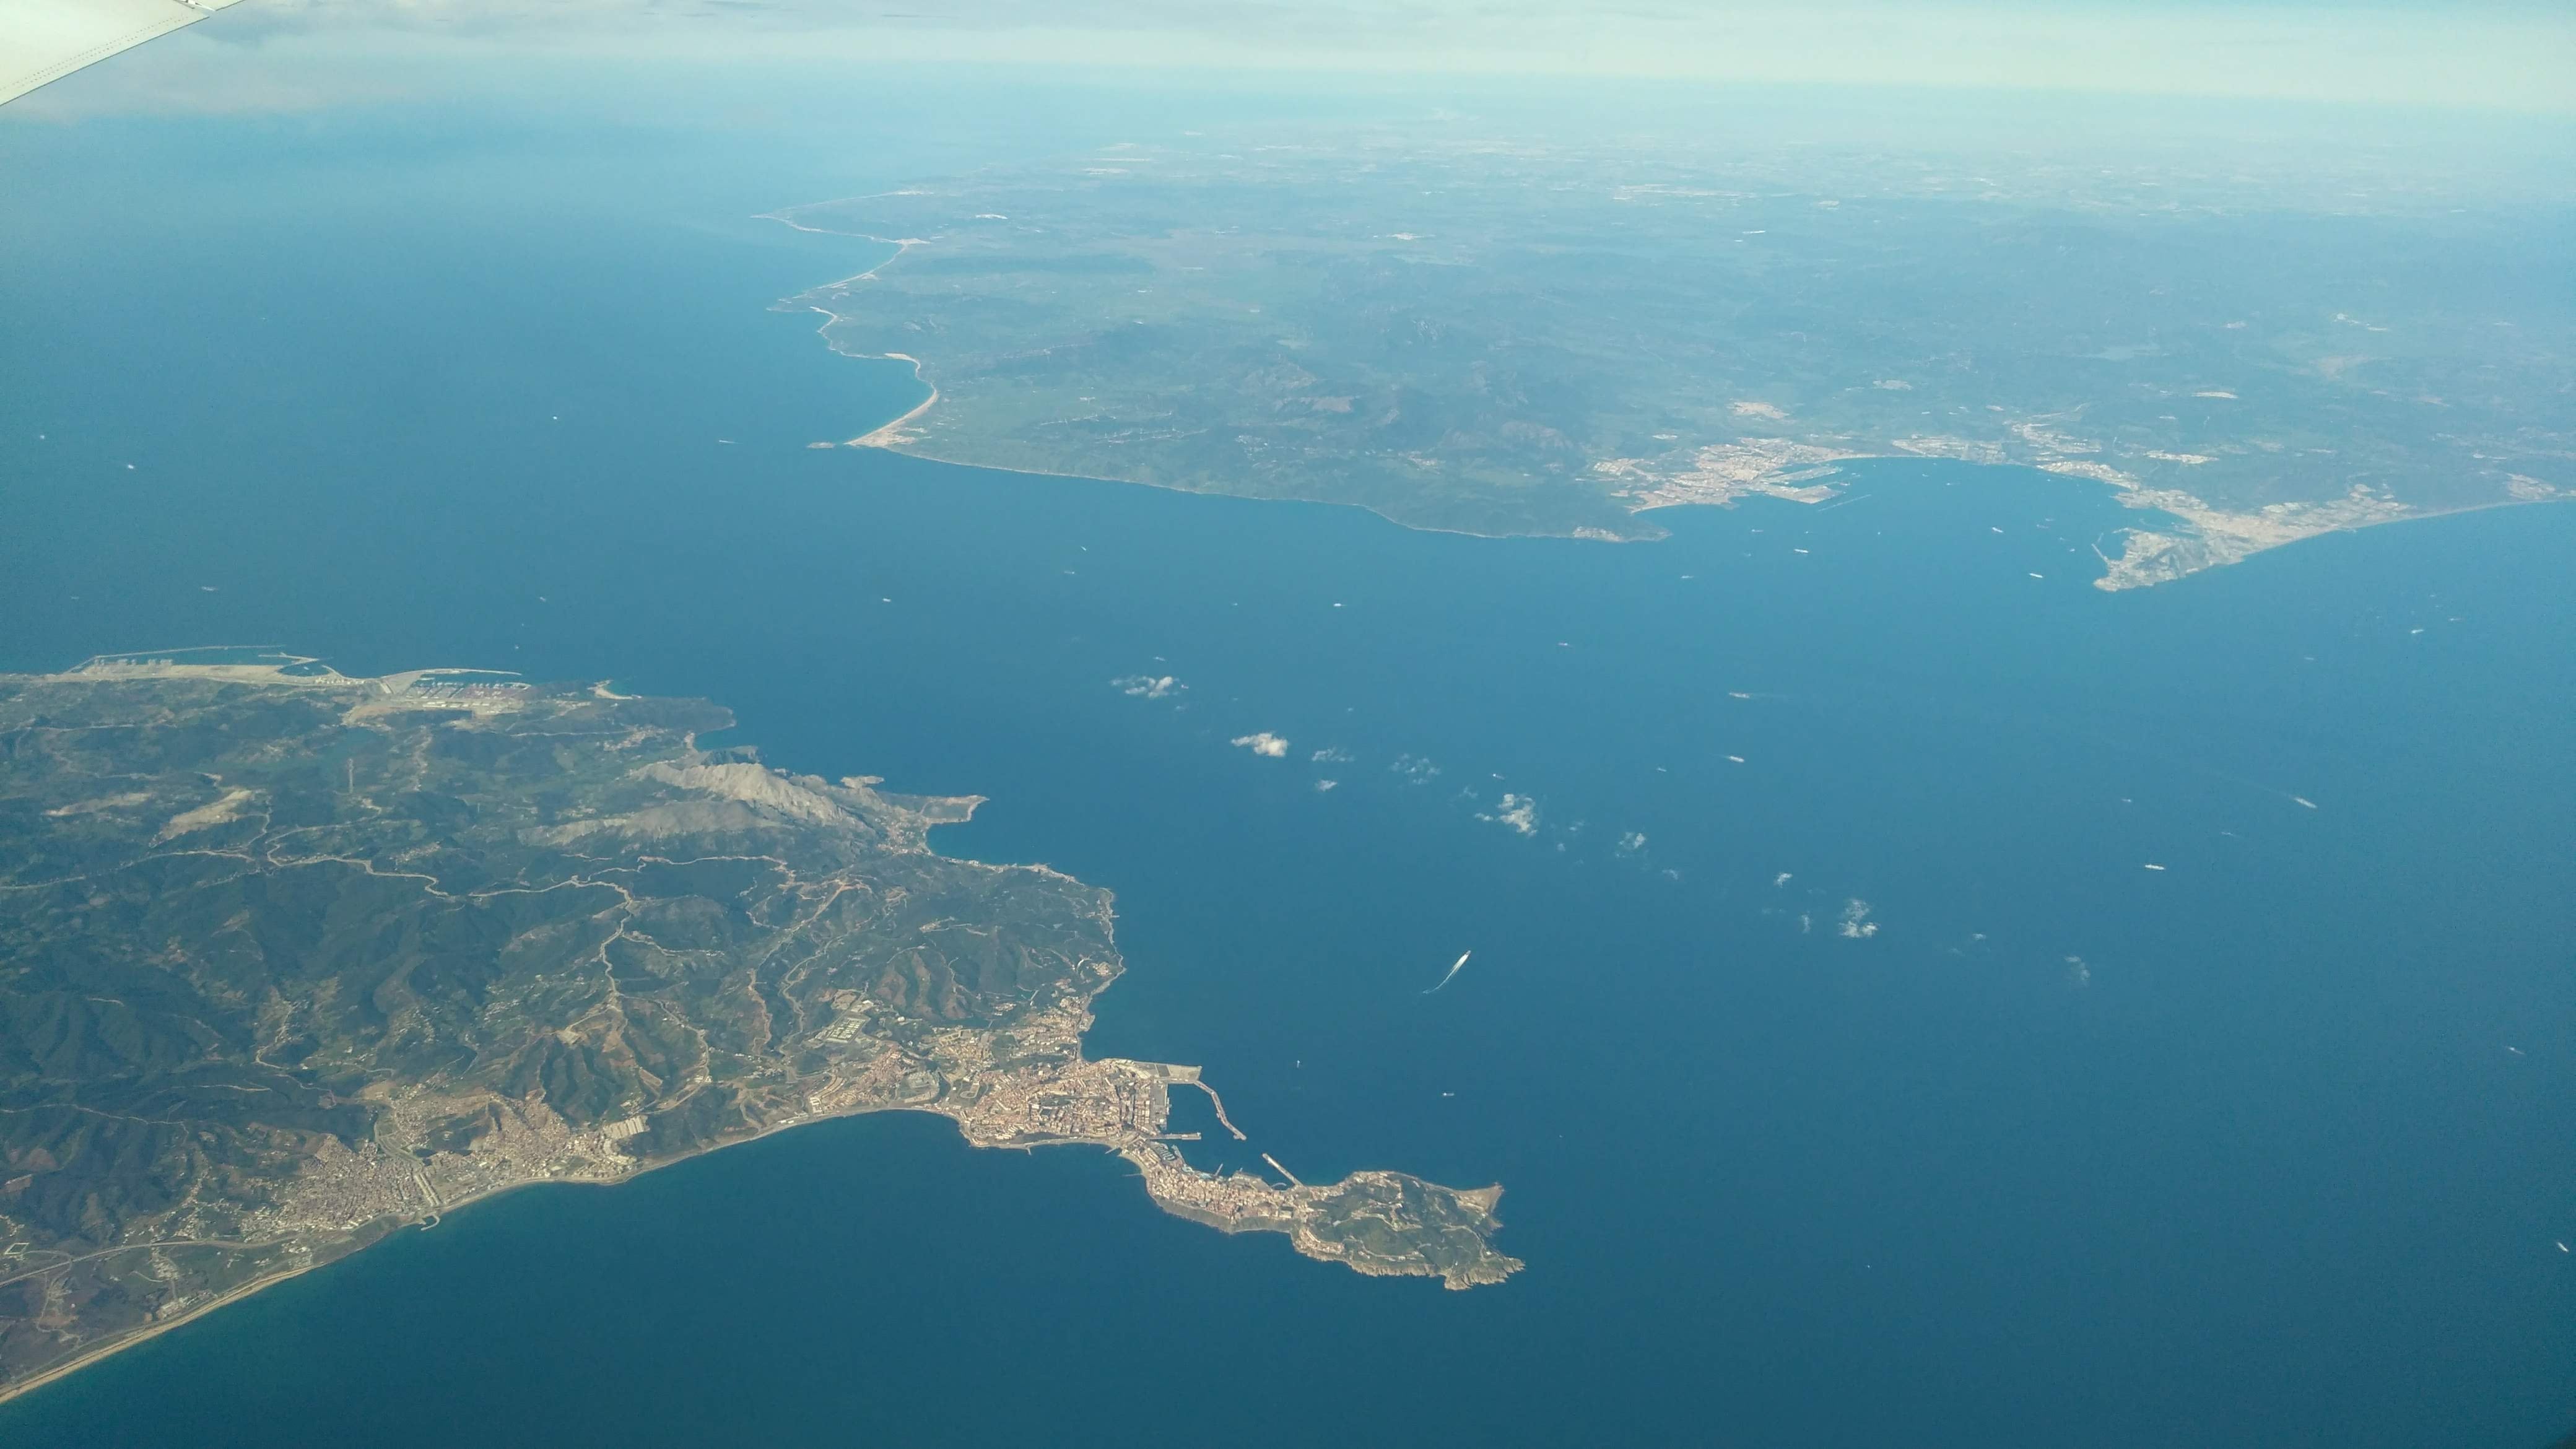 message-editor%2F1619124136318-strait_of_gibraltar_from_plane.jpeg